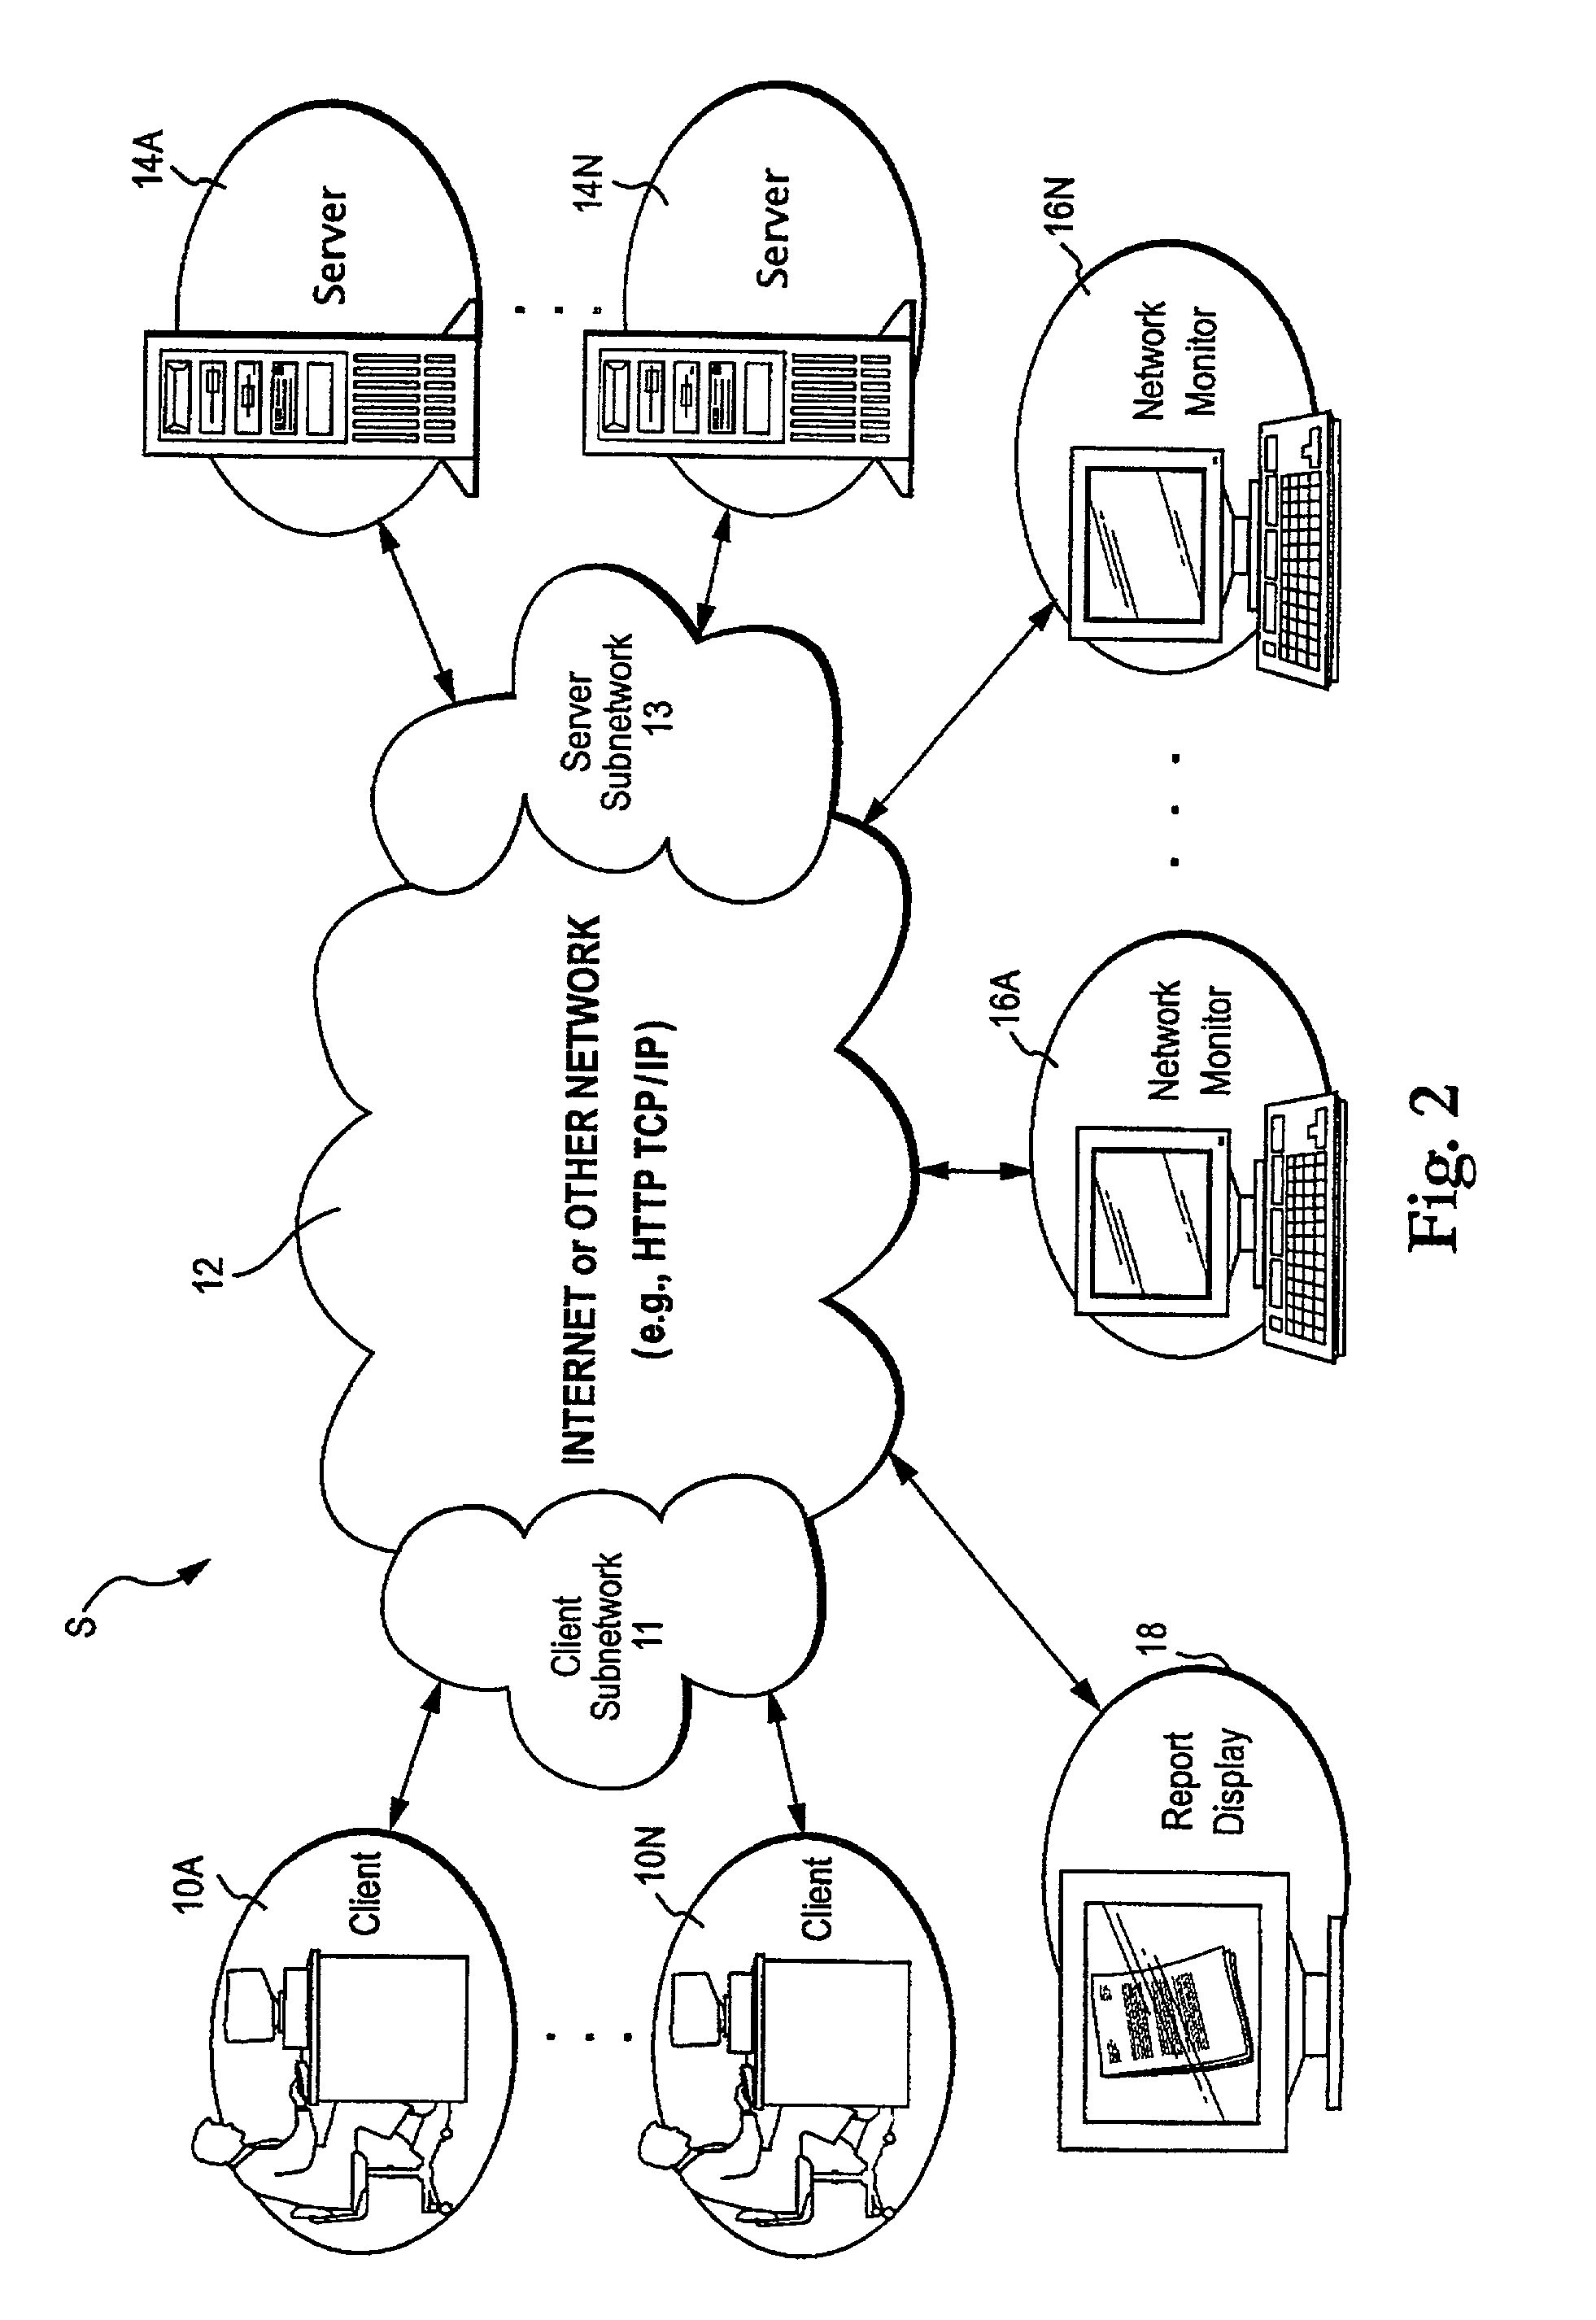 Methods of determining communications protocol latency